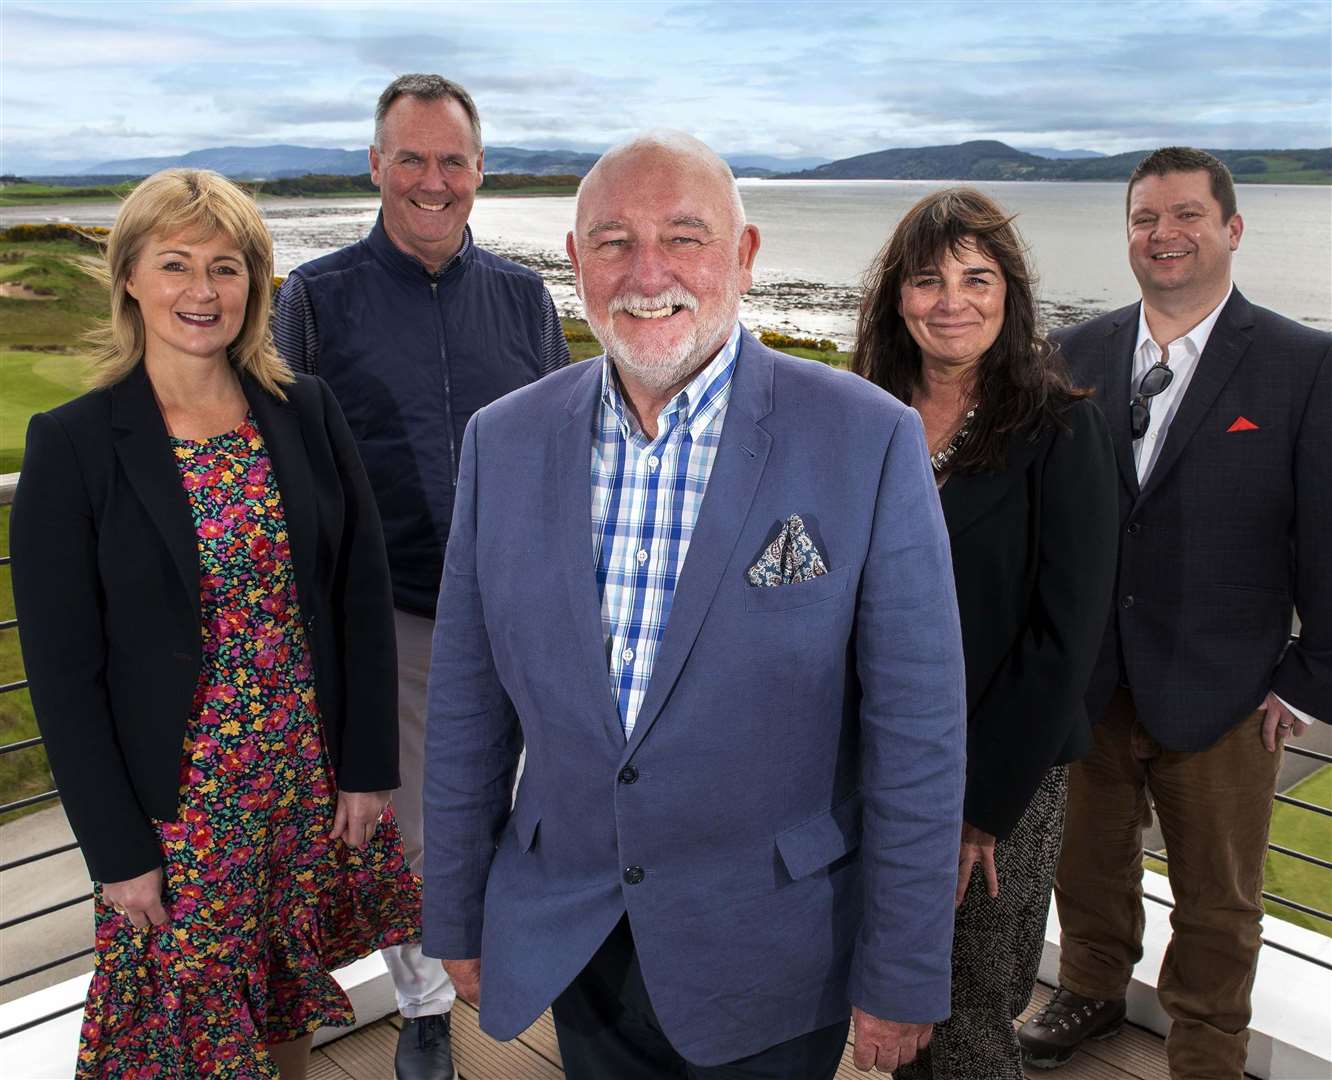 From left: Highland Tourism chairperson Yvonne Crook, directors Stuart McColm and Willie Cameron, vice-chairperson Sam Faircliff and director Chris O’Brien. Picture: Trevor Martin